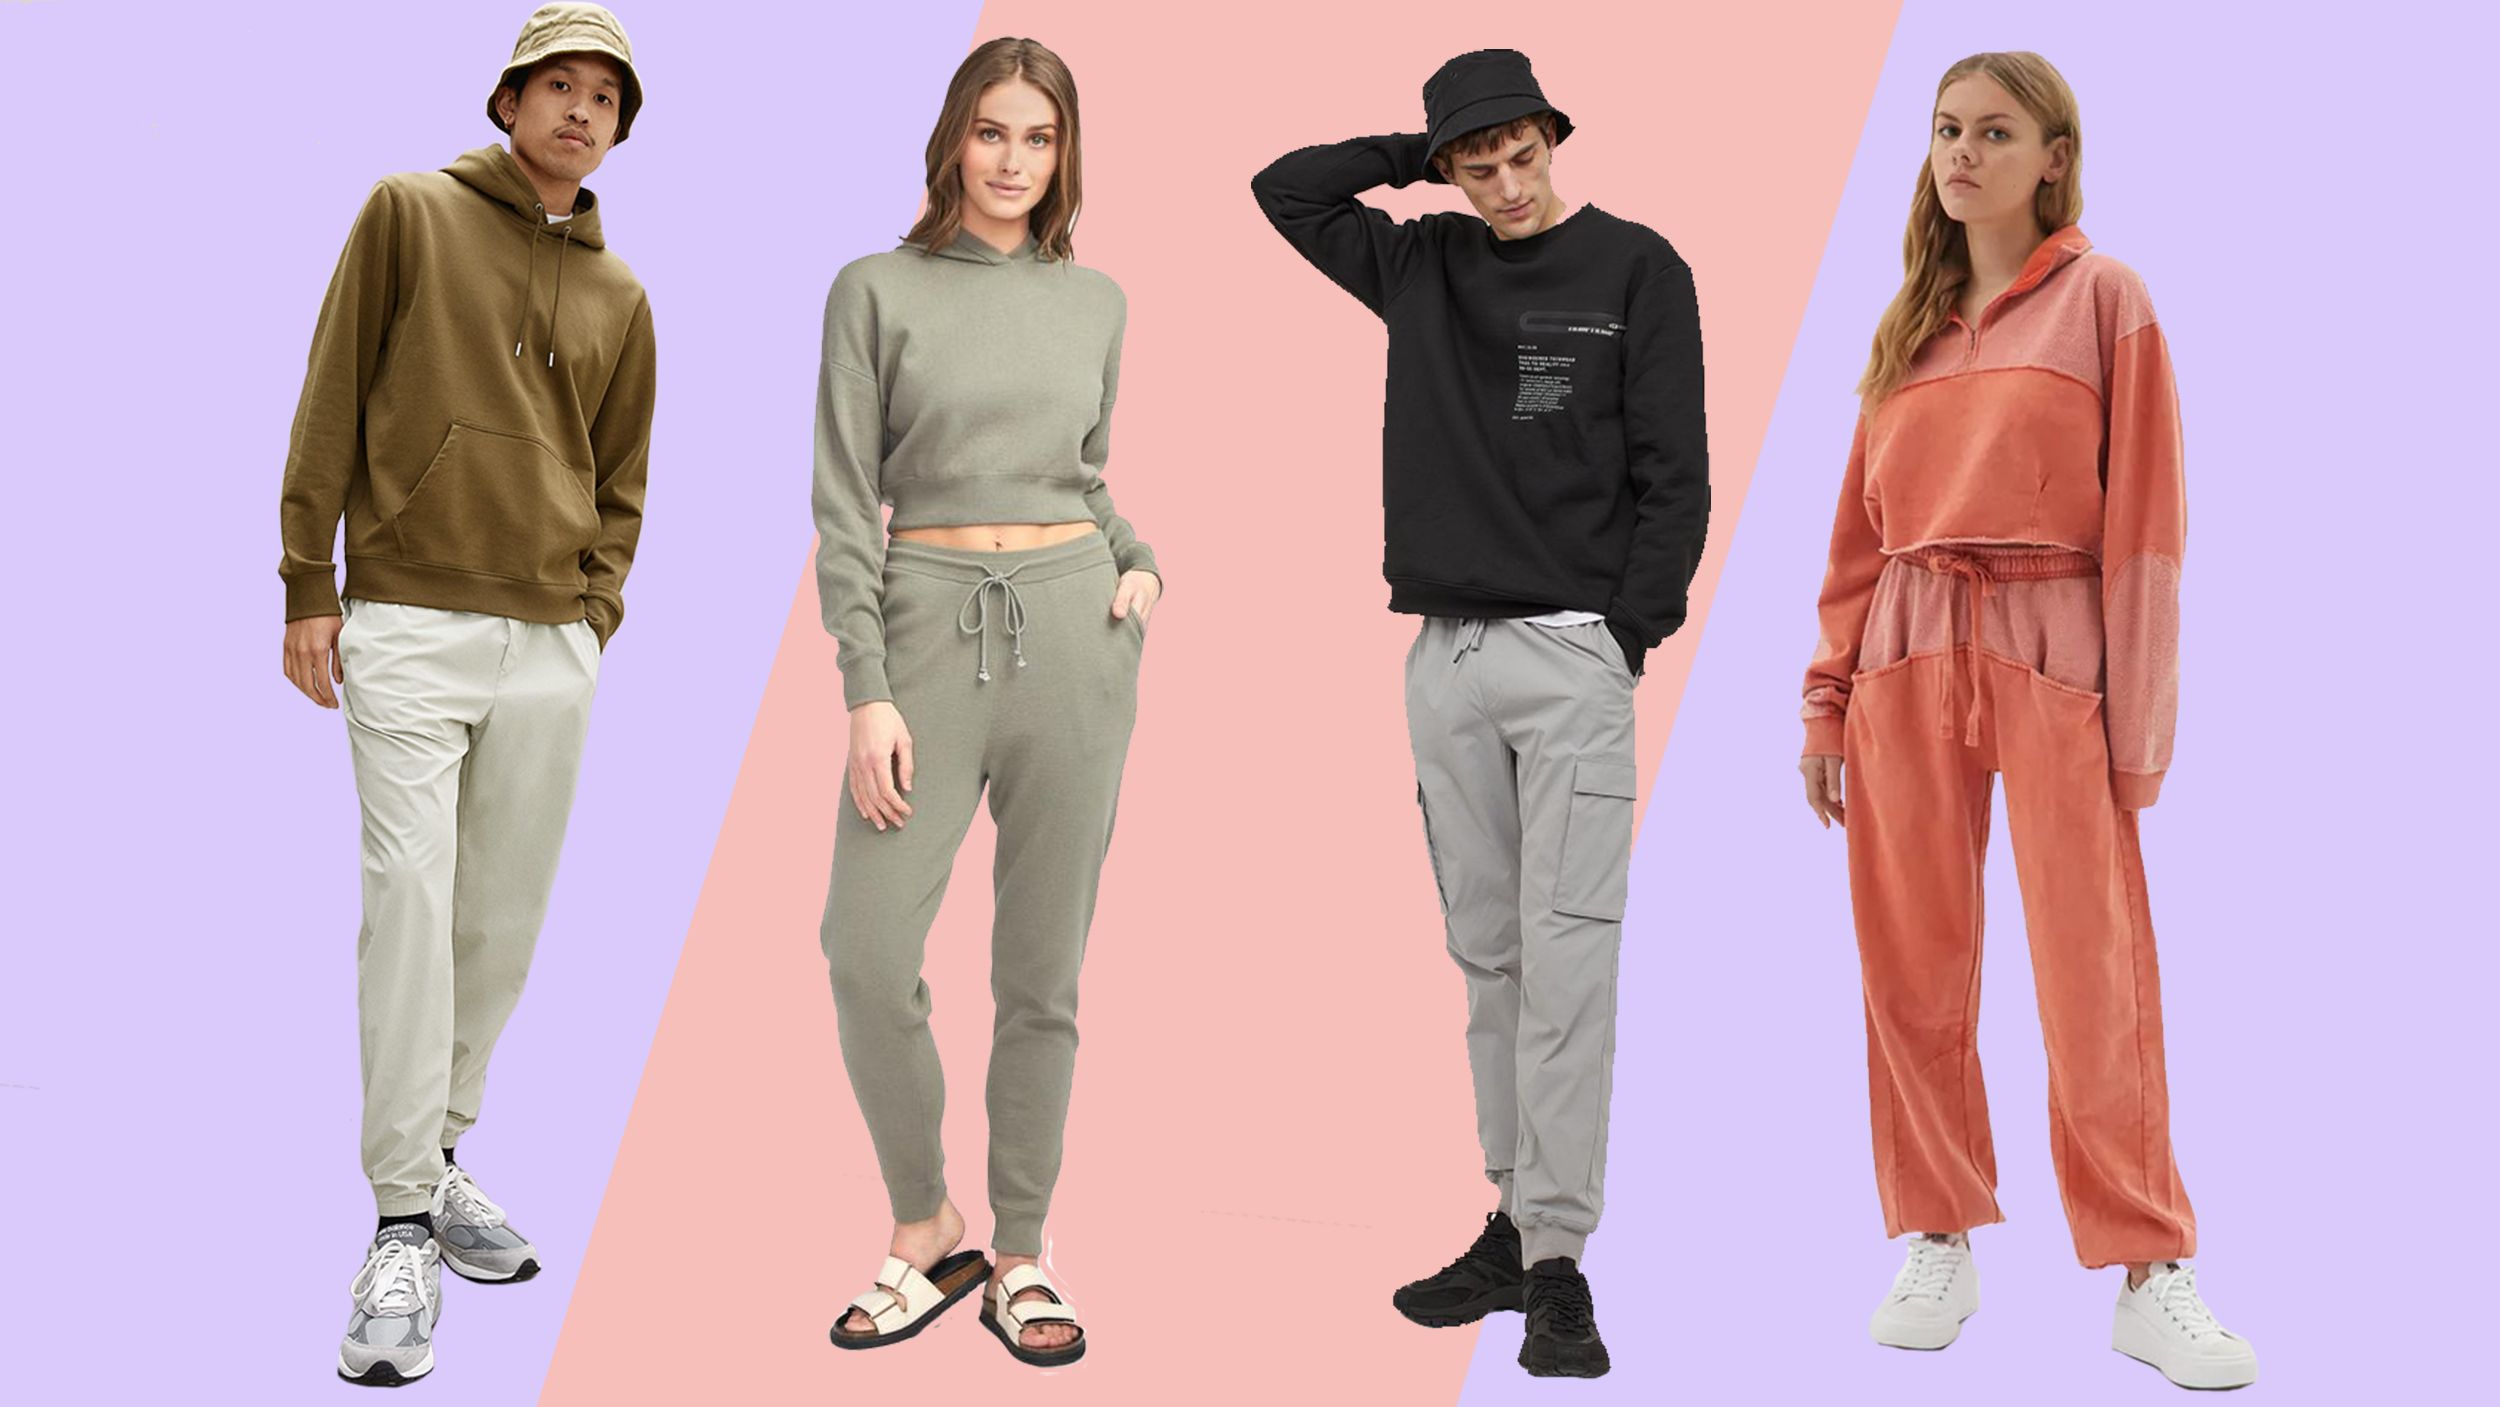 This is why women love wearing men's pants, according to study